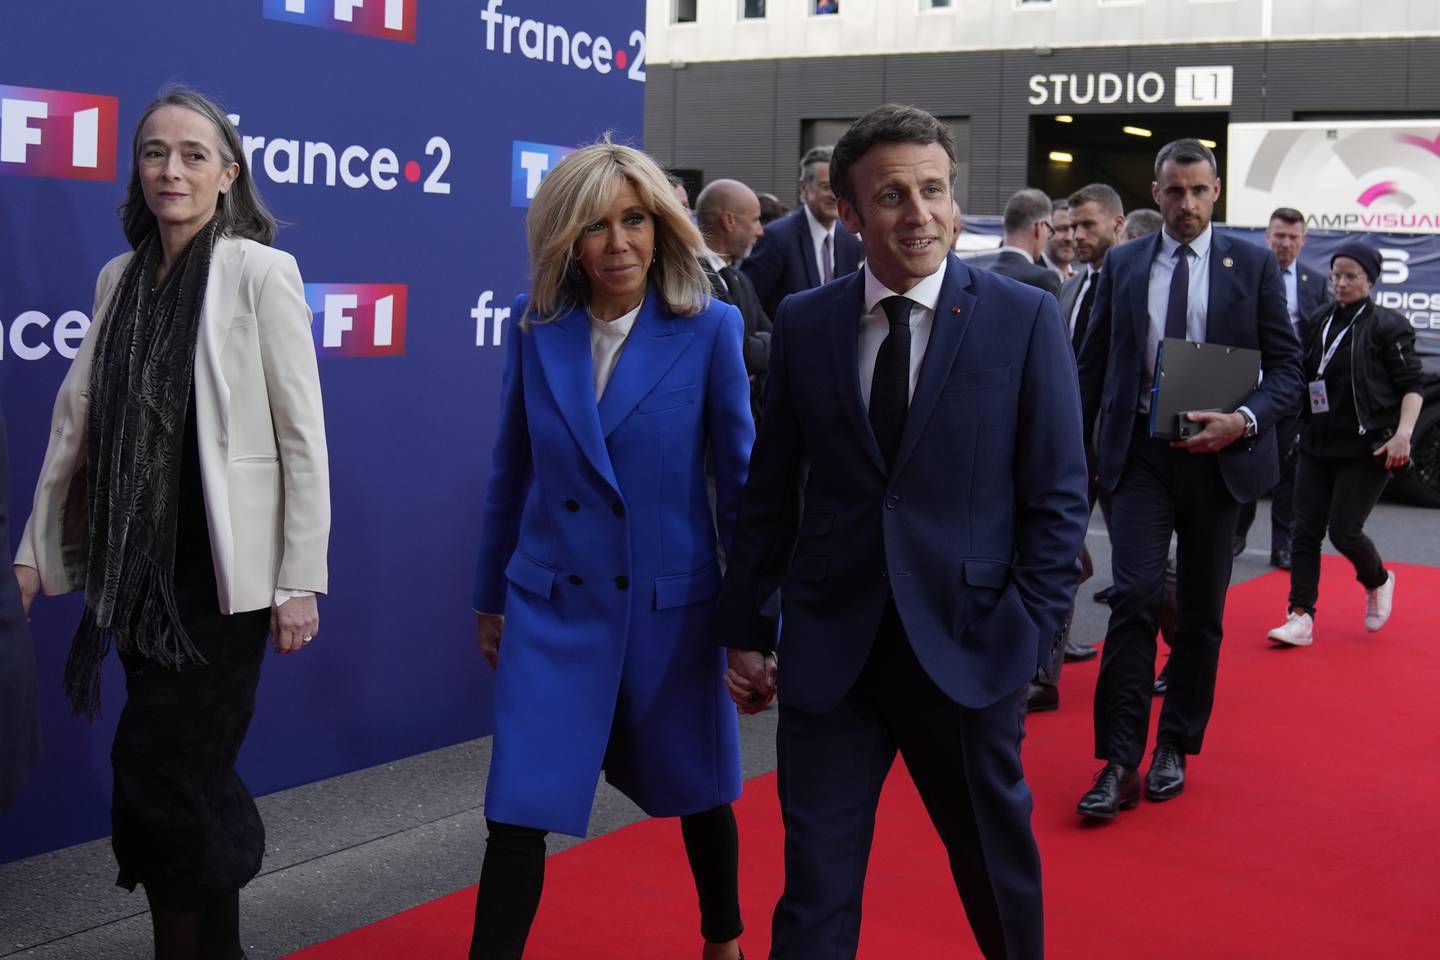 Centrist candidate and French President Emmanuel Macron and his wife Brigitte Macron arrive at a television recording studio for a debate with far-right leader Marine Le Pen, Wednesday, April 20, 2022 in La Plaine-Saint-Denis, outside Paris. In the climax of France's presidential campaign, centrist President Emmanuel Macron and far-right contender Marine Le Pen meet in a one-on-one television debate that could prove decisive before Sunday's runoff vote. At left is chief executive officer of French TV Group France Televisions Delphine Ernotte. (AP Photo/Francois Mori)